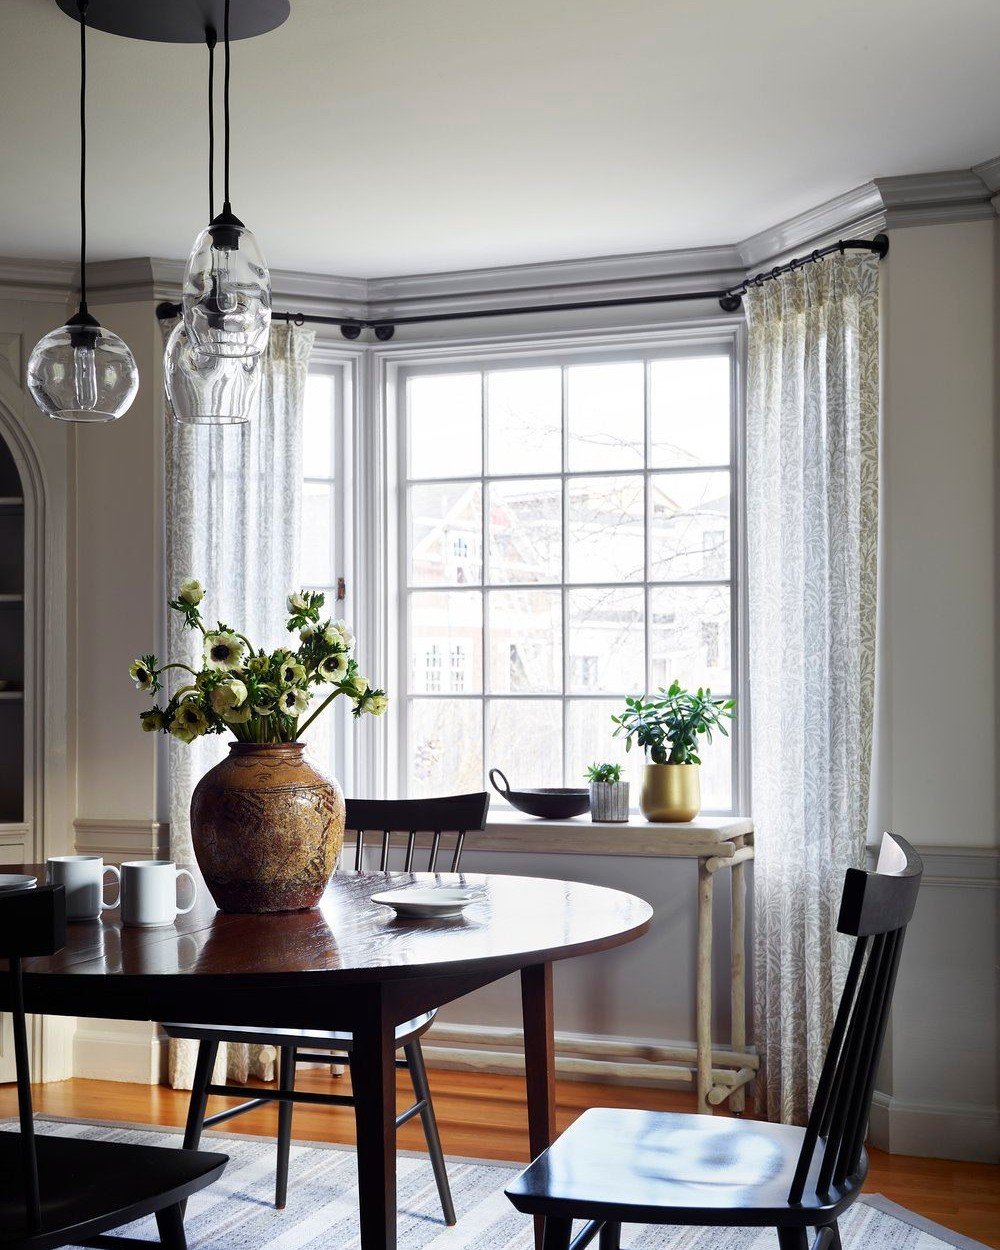 Doesn't the contrast of dove gray crown molding and wainscoting against rich dark woods feel so chic? I opted for sheer window treatments to add a soft touch. For a unique blend of styles, I paired fresh flowers and vintage-inspired accents with mode